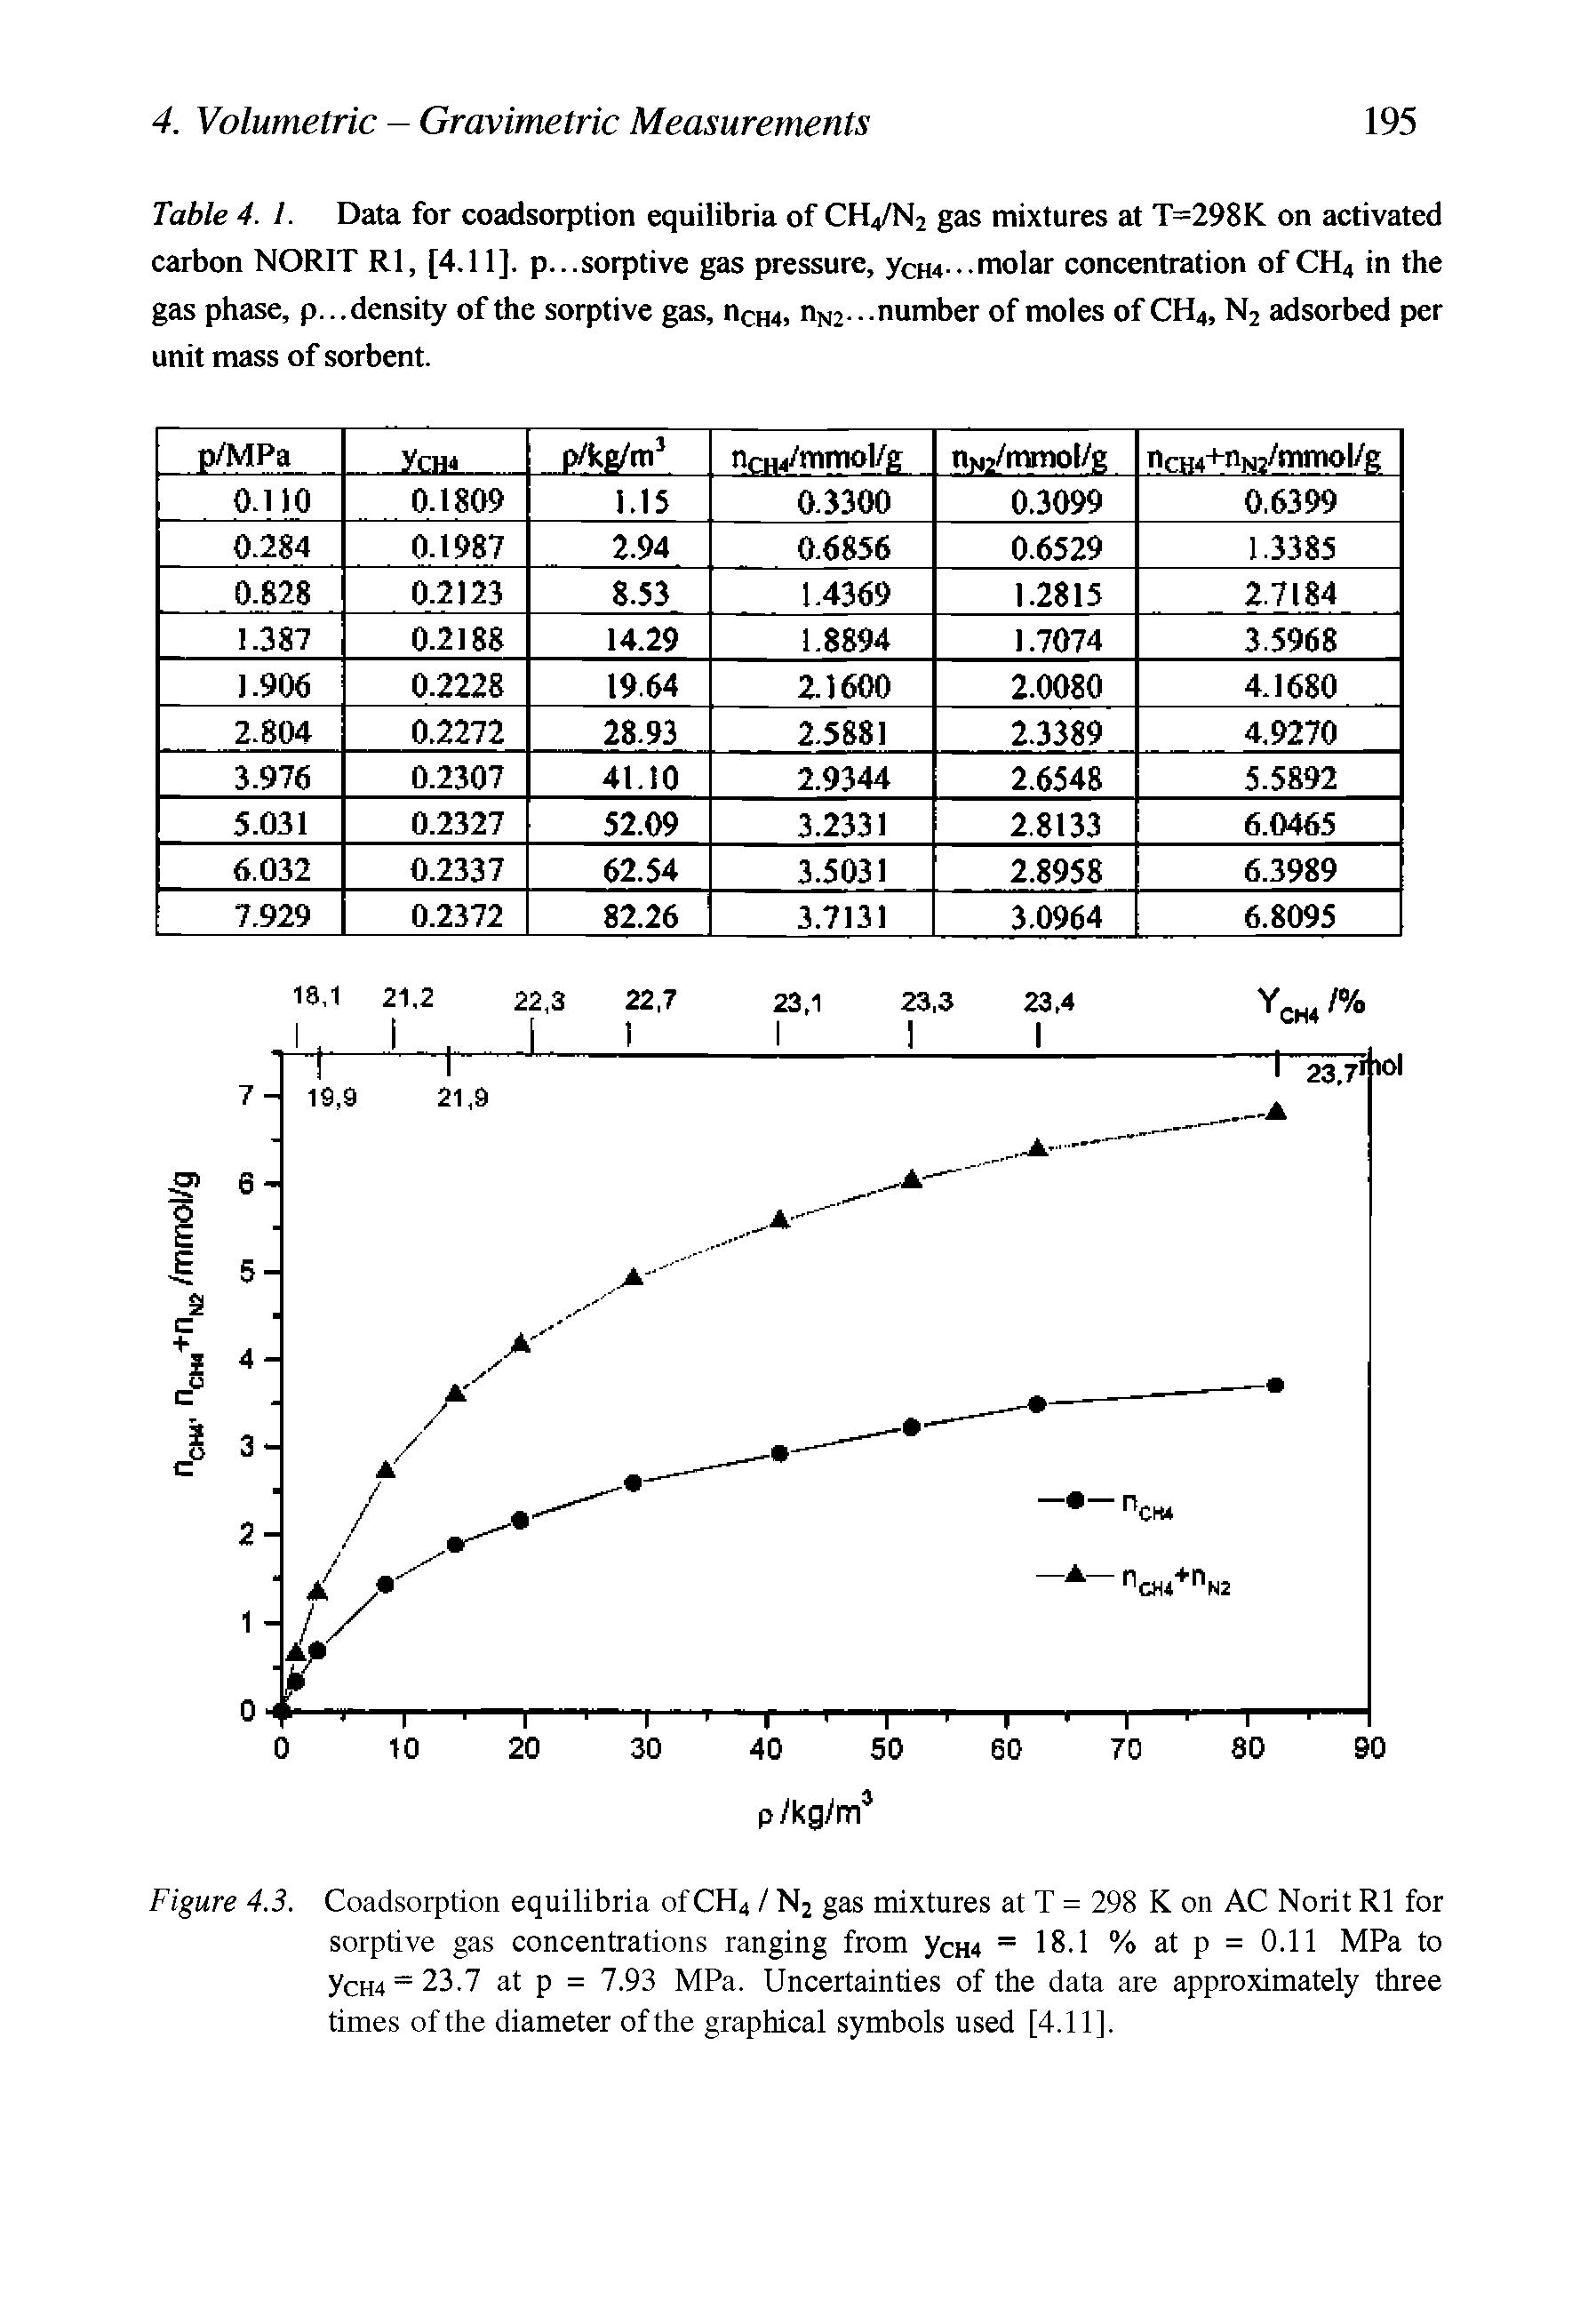 Table 4. I. Data for coadsorption equilibria of CH4/N2 gas mixtures at T=298K on activated carbon NORIT Rl, [4.11]. p...sorptive gas pressure, ycH4 - molar concentration of CH4 in the gas phase, p...density of the sorptive gas, ncH4, nN2-..number of moles ofCH4, N2 adsorbed per unit mass of sorbent.